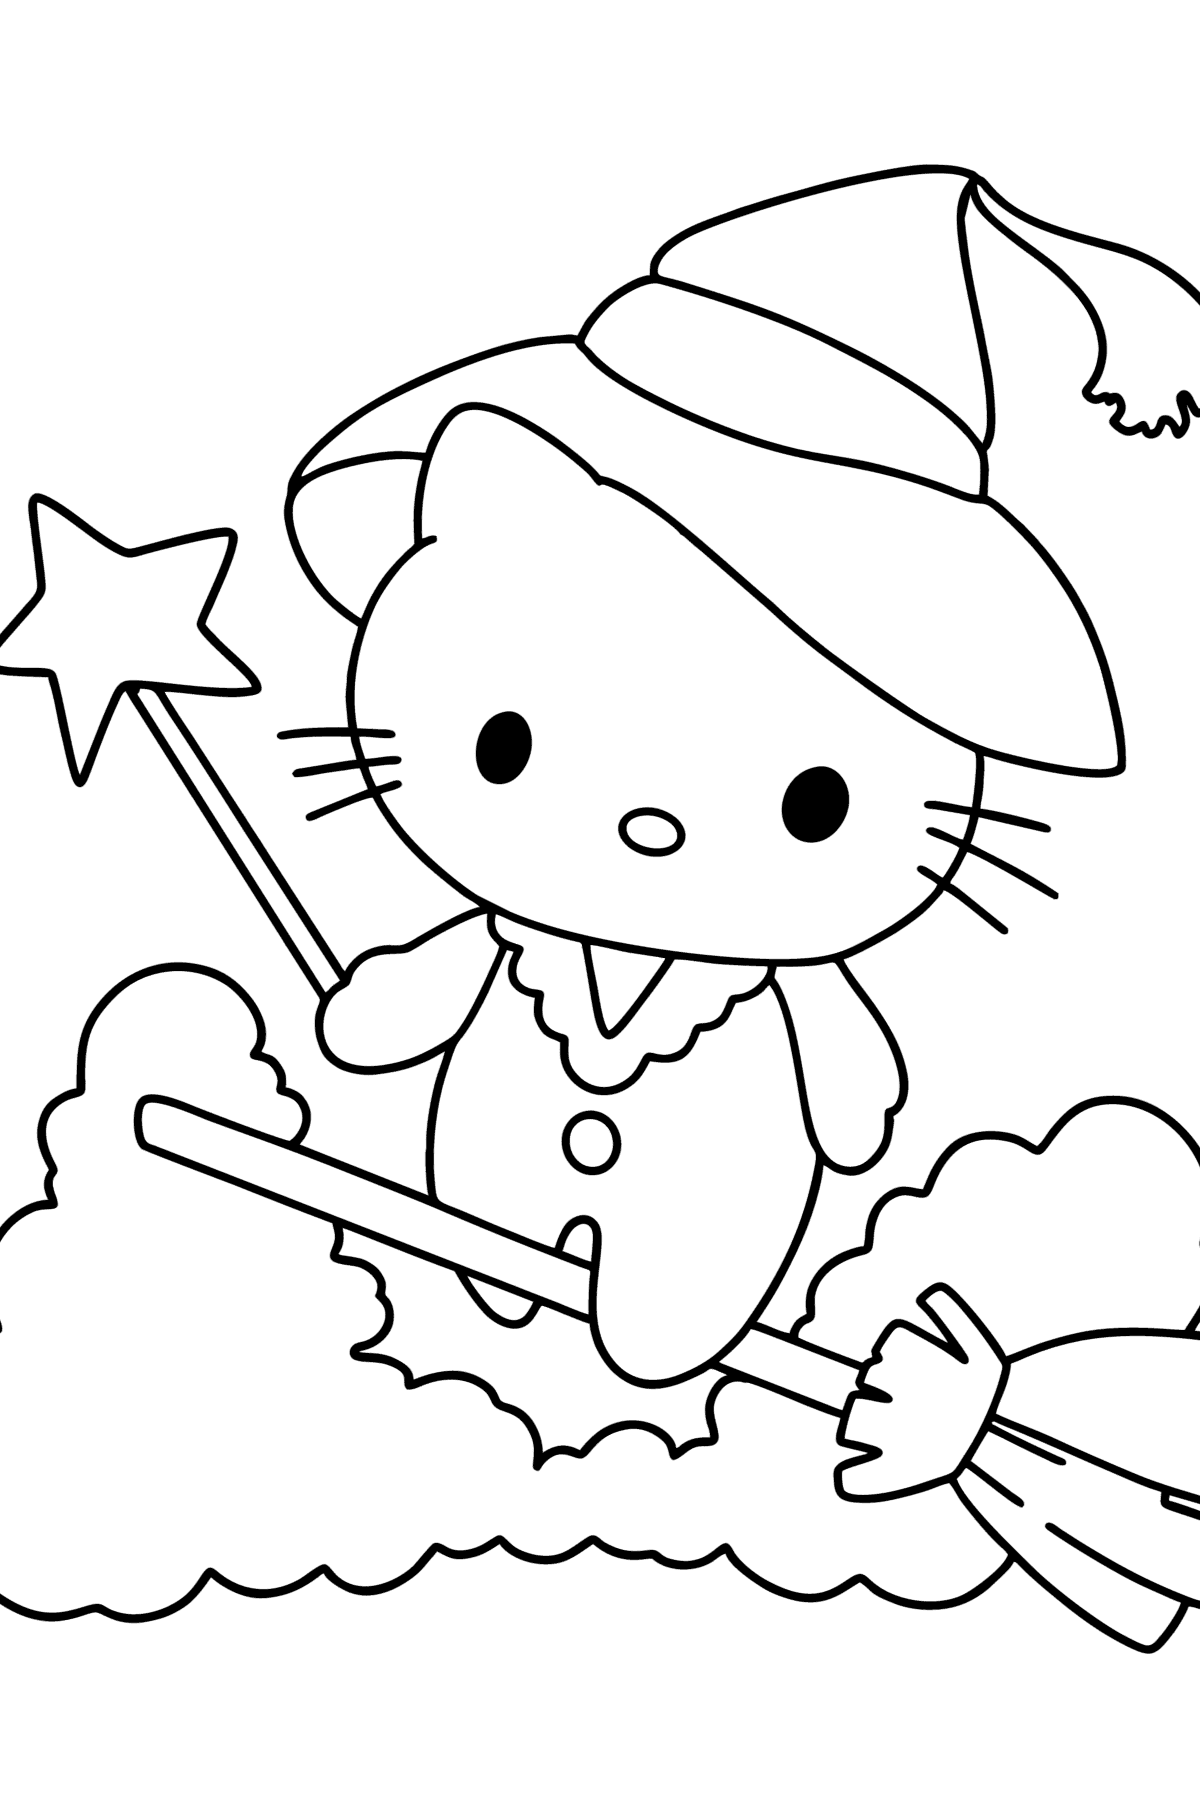 Hello Kitty Halloween coloring page - Coloring Pages for Kids